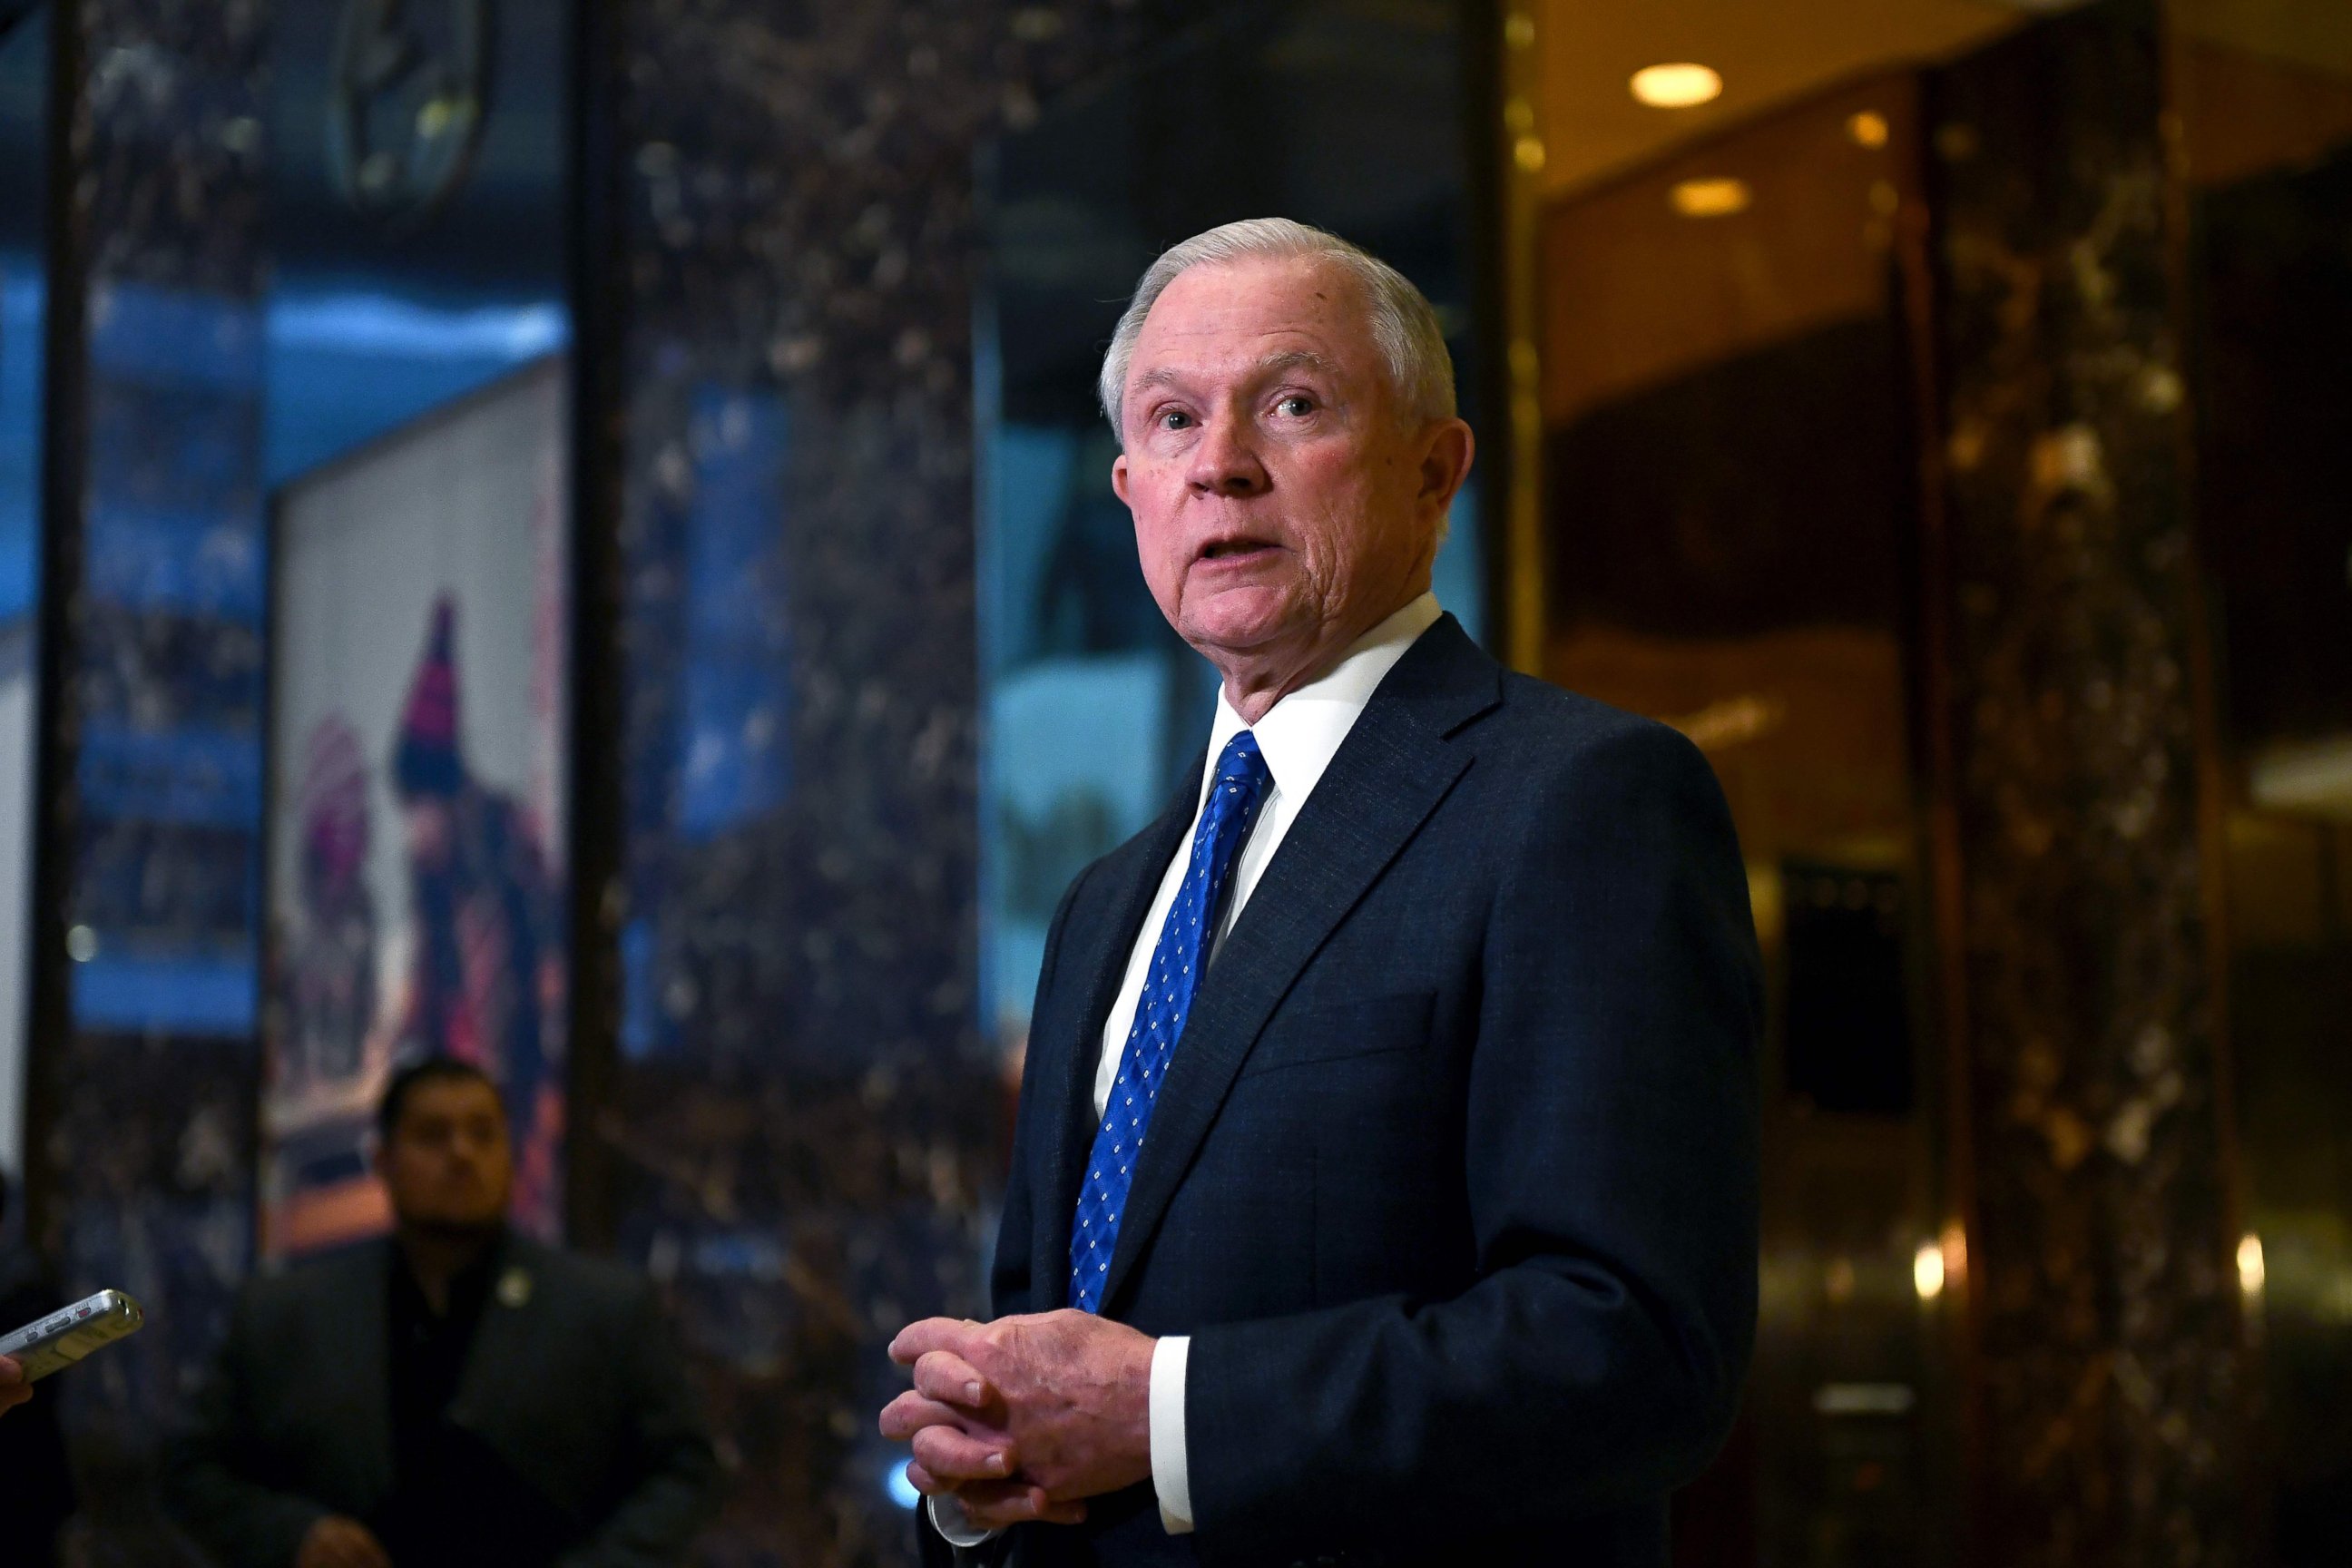 PHOTO: Sen. Jeff Sessions of Alabama talks to the media at the Trump Tower in New York, Nov. 17, 2016.